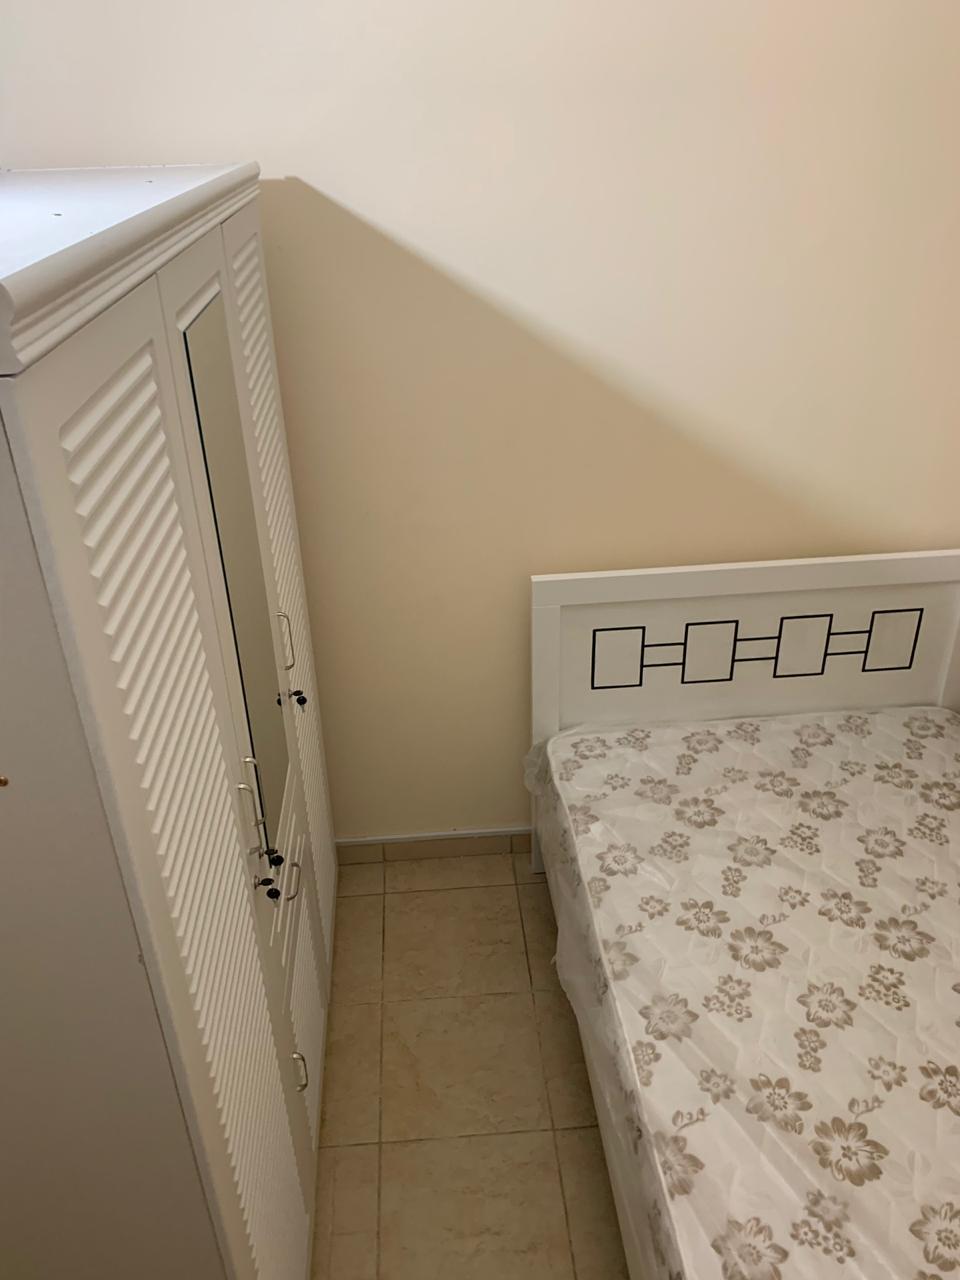 Closed Partition Room With Sharing Bathroom